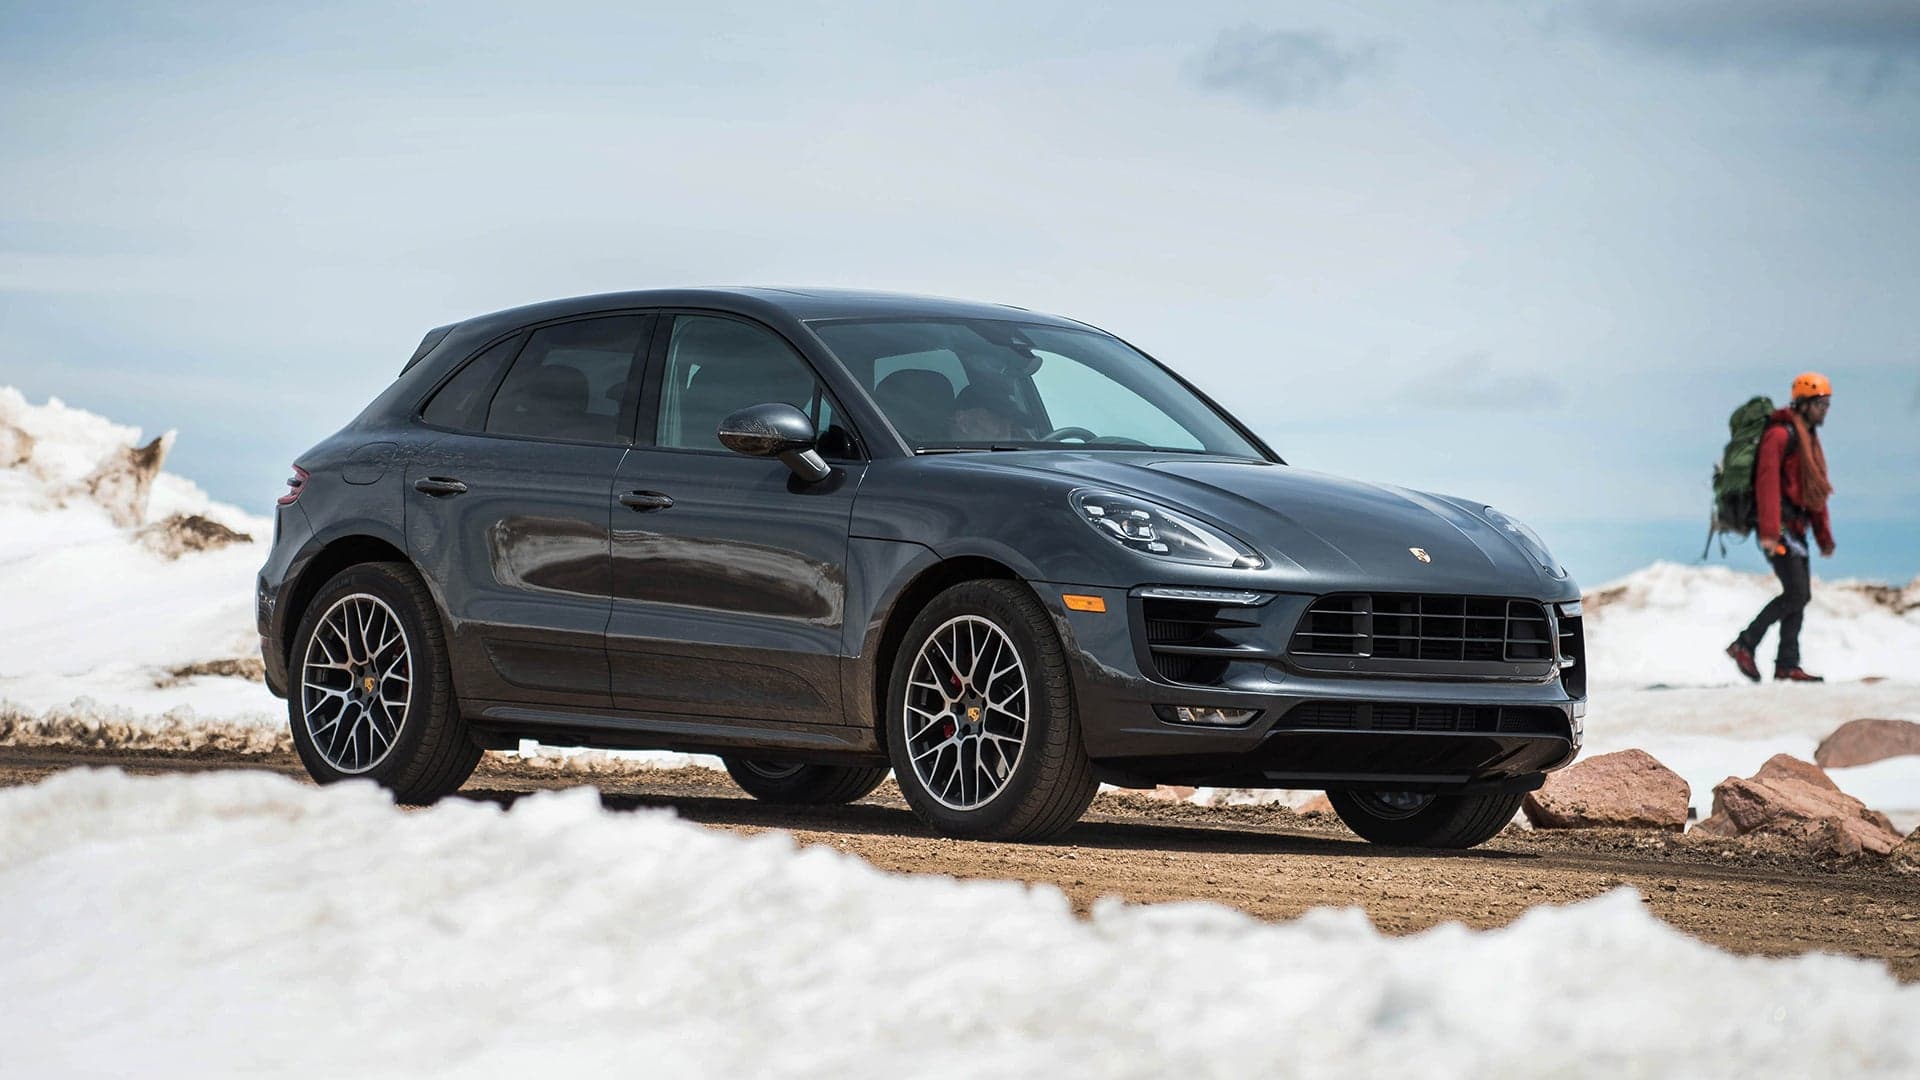 The Porsche Macan Outsold the 911 by a 3-to-1 Margin Worldwide in 2017